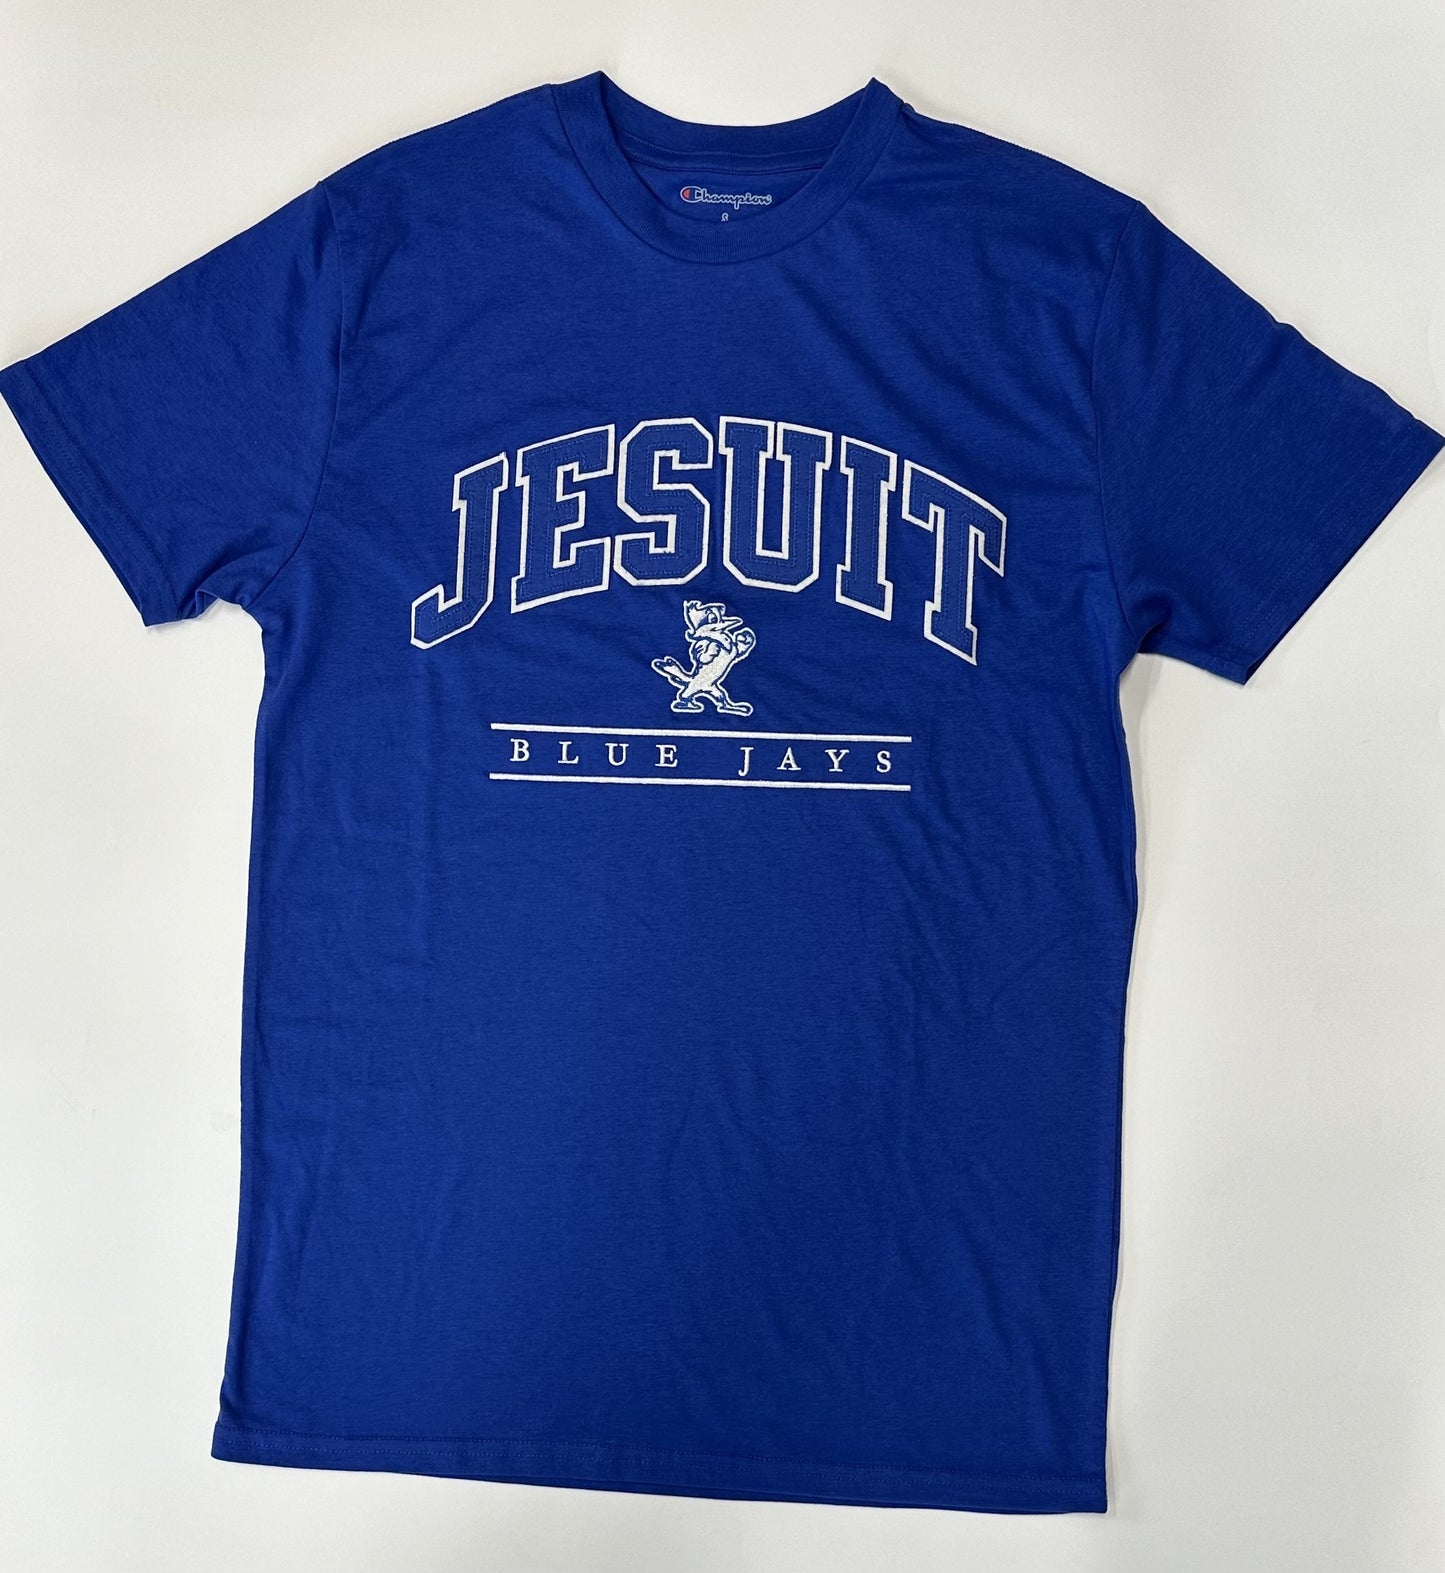 Champion. 60% Cotton/40% Polyester. From the 2024 Stadium Collection. Comfortable and super soft cotton/polyester jersey with 1 x 1 rib crew neckline. Jesuit logos - applique application with Jayson and Blue Jays.